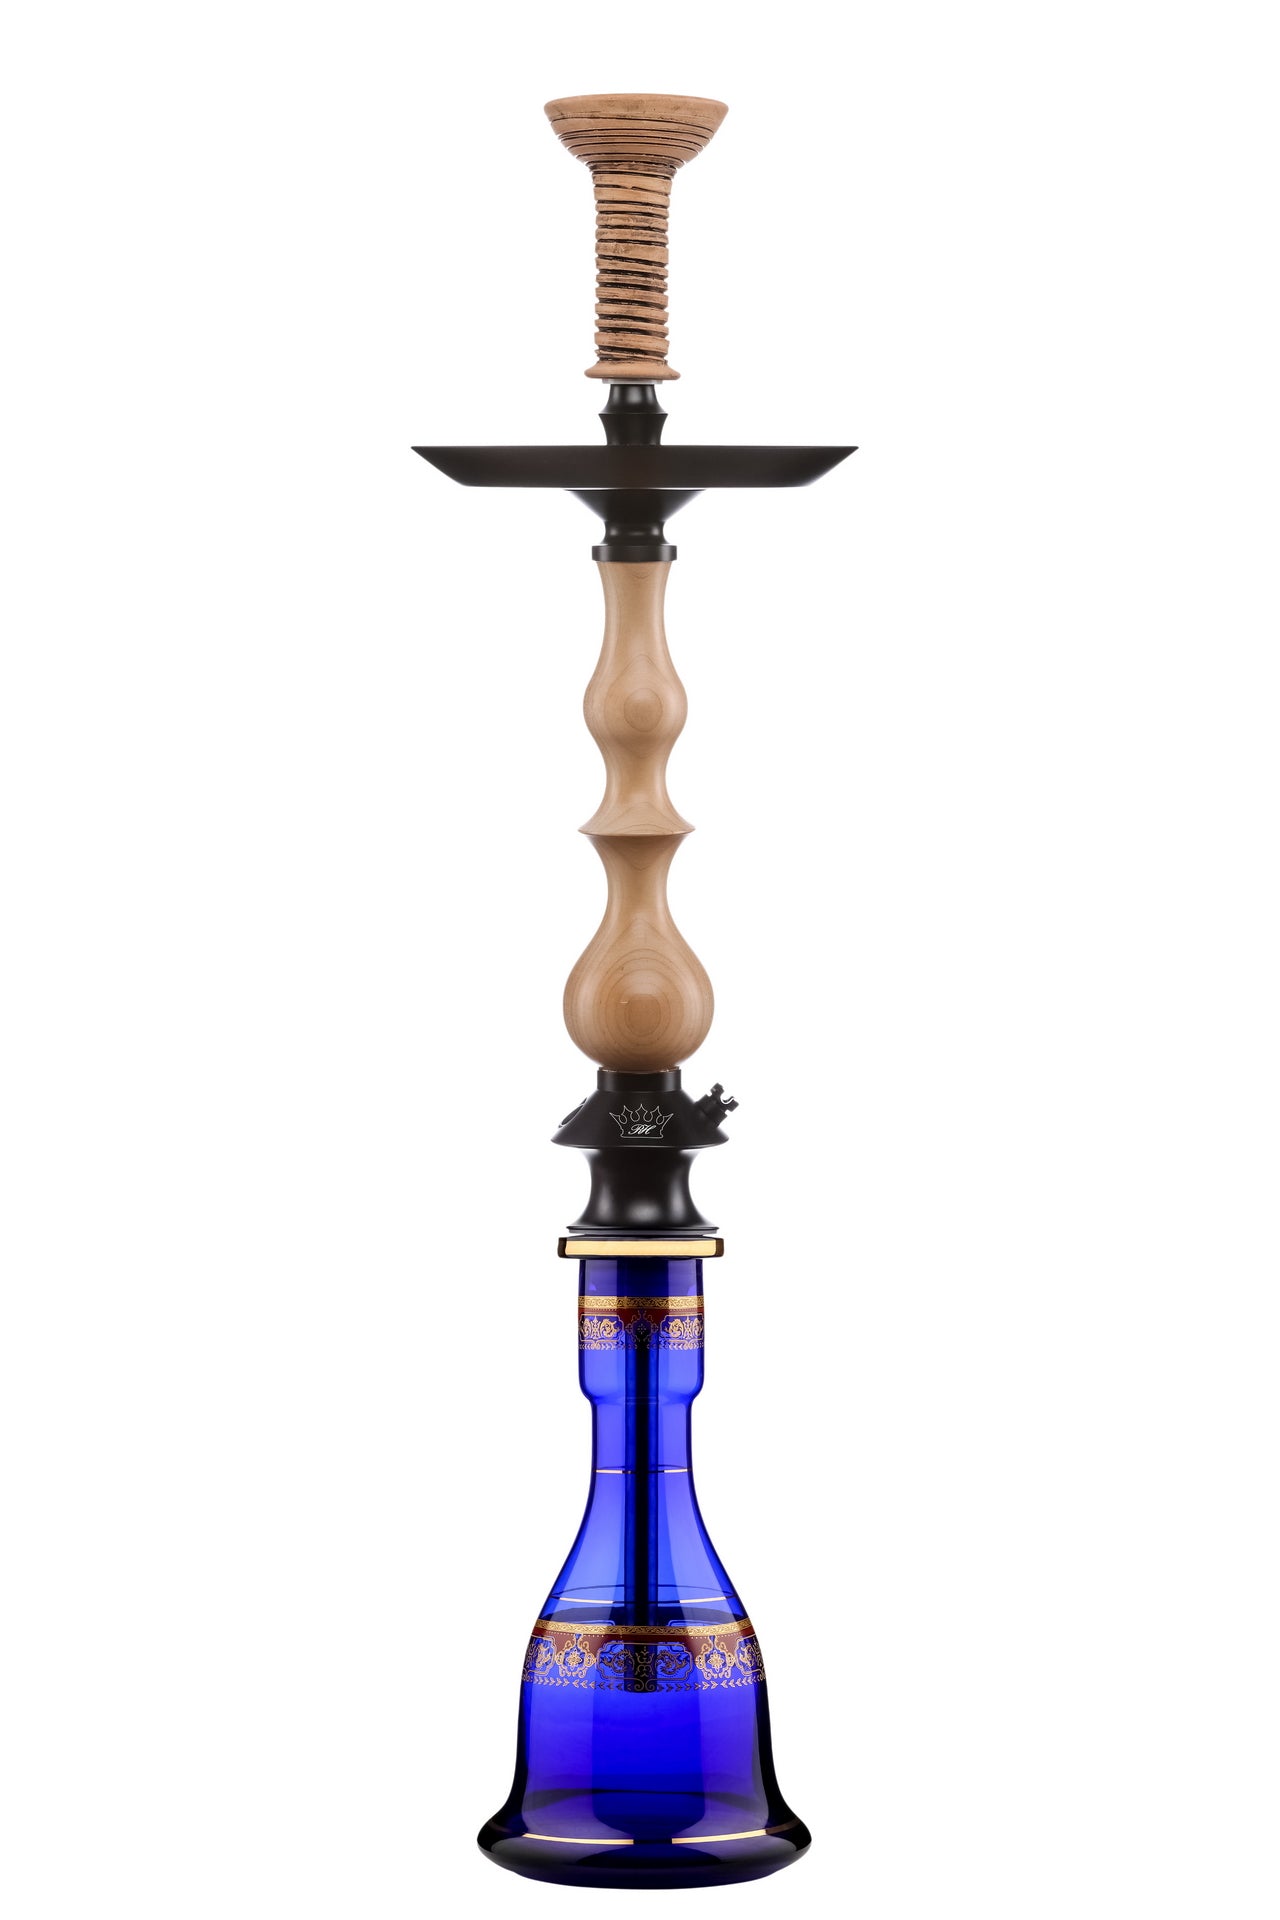 Regal Hookah Queen Maplewood (Stem and Standard Tray ONLY) - - Shishamore.com